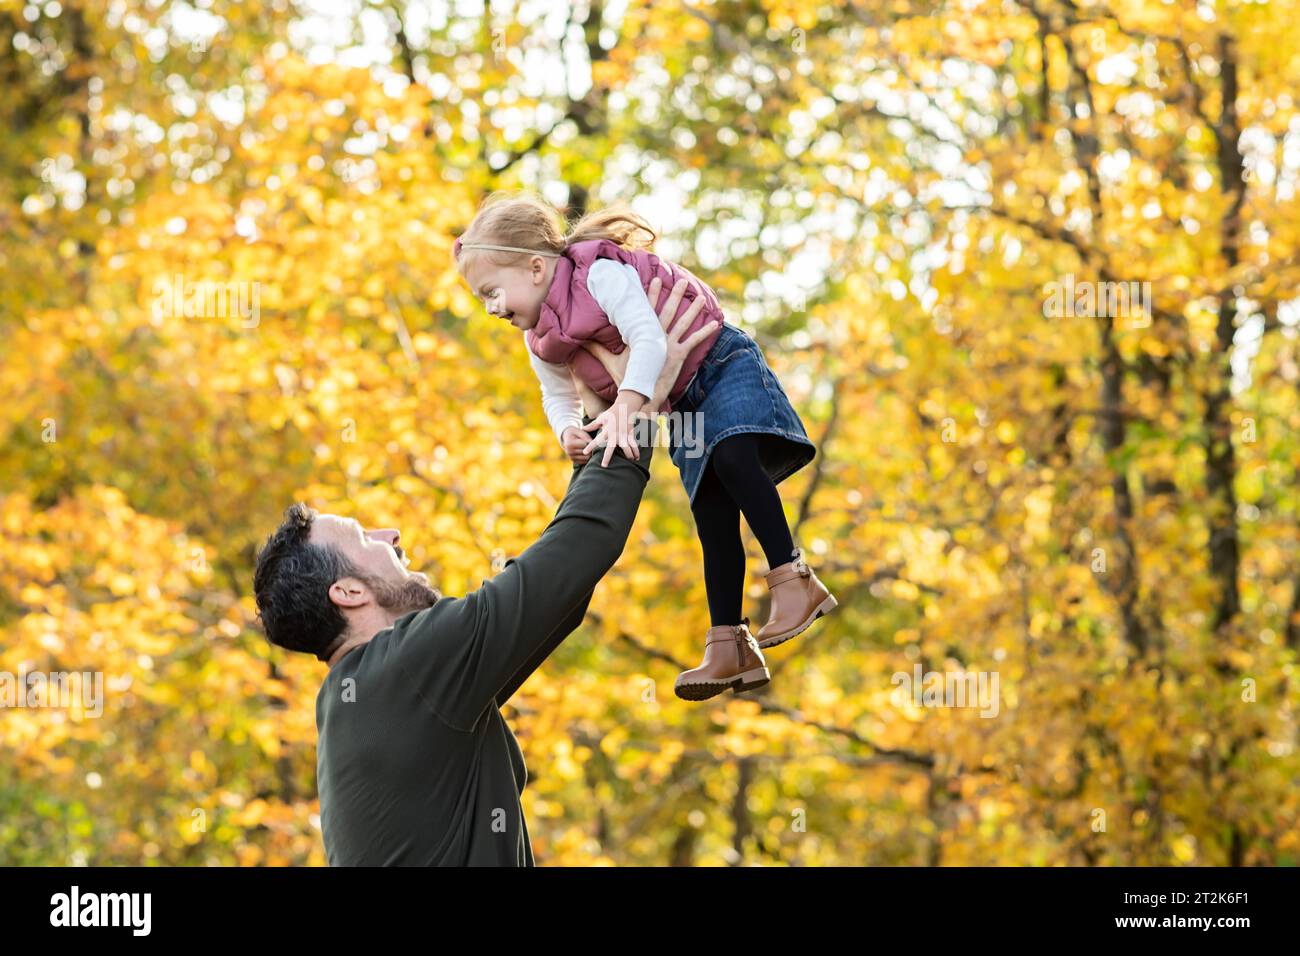 Dad lifting daughter in the air amidst a fall backdrop Stock Photo